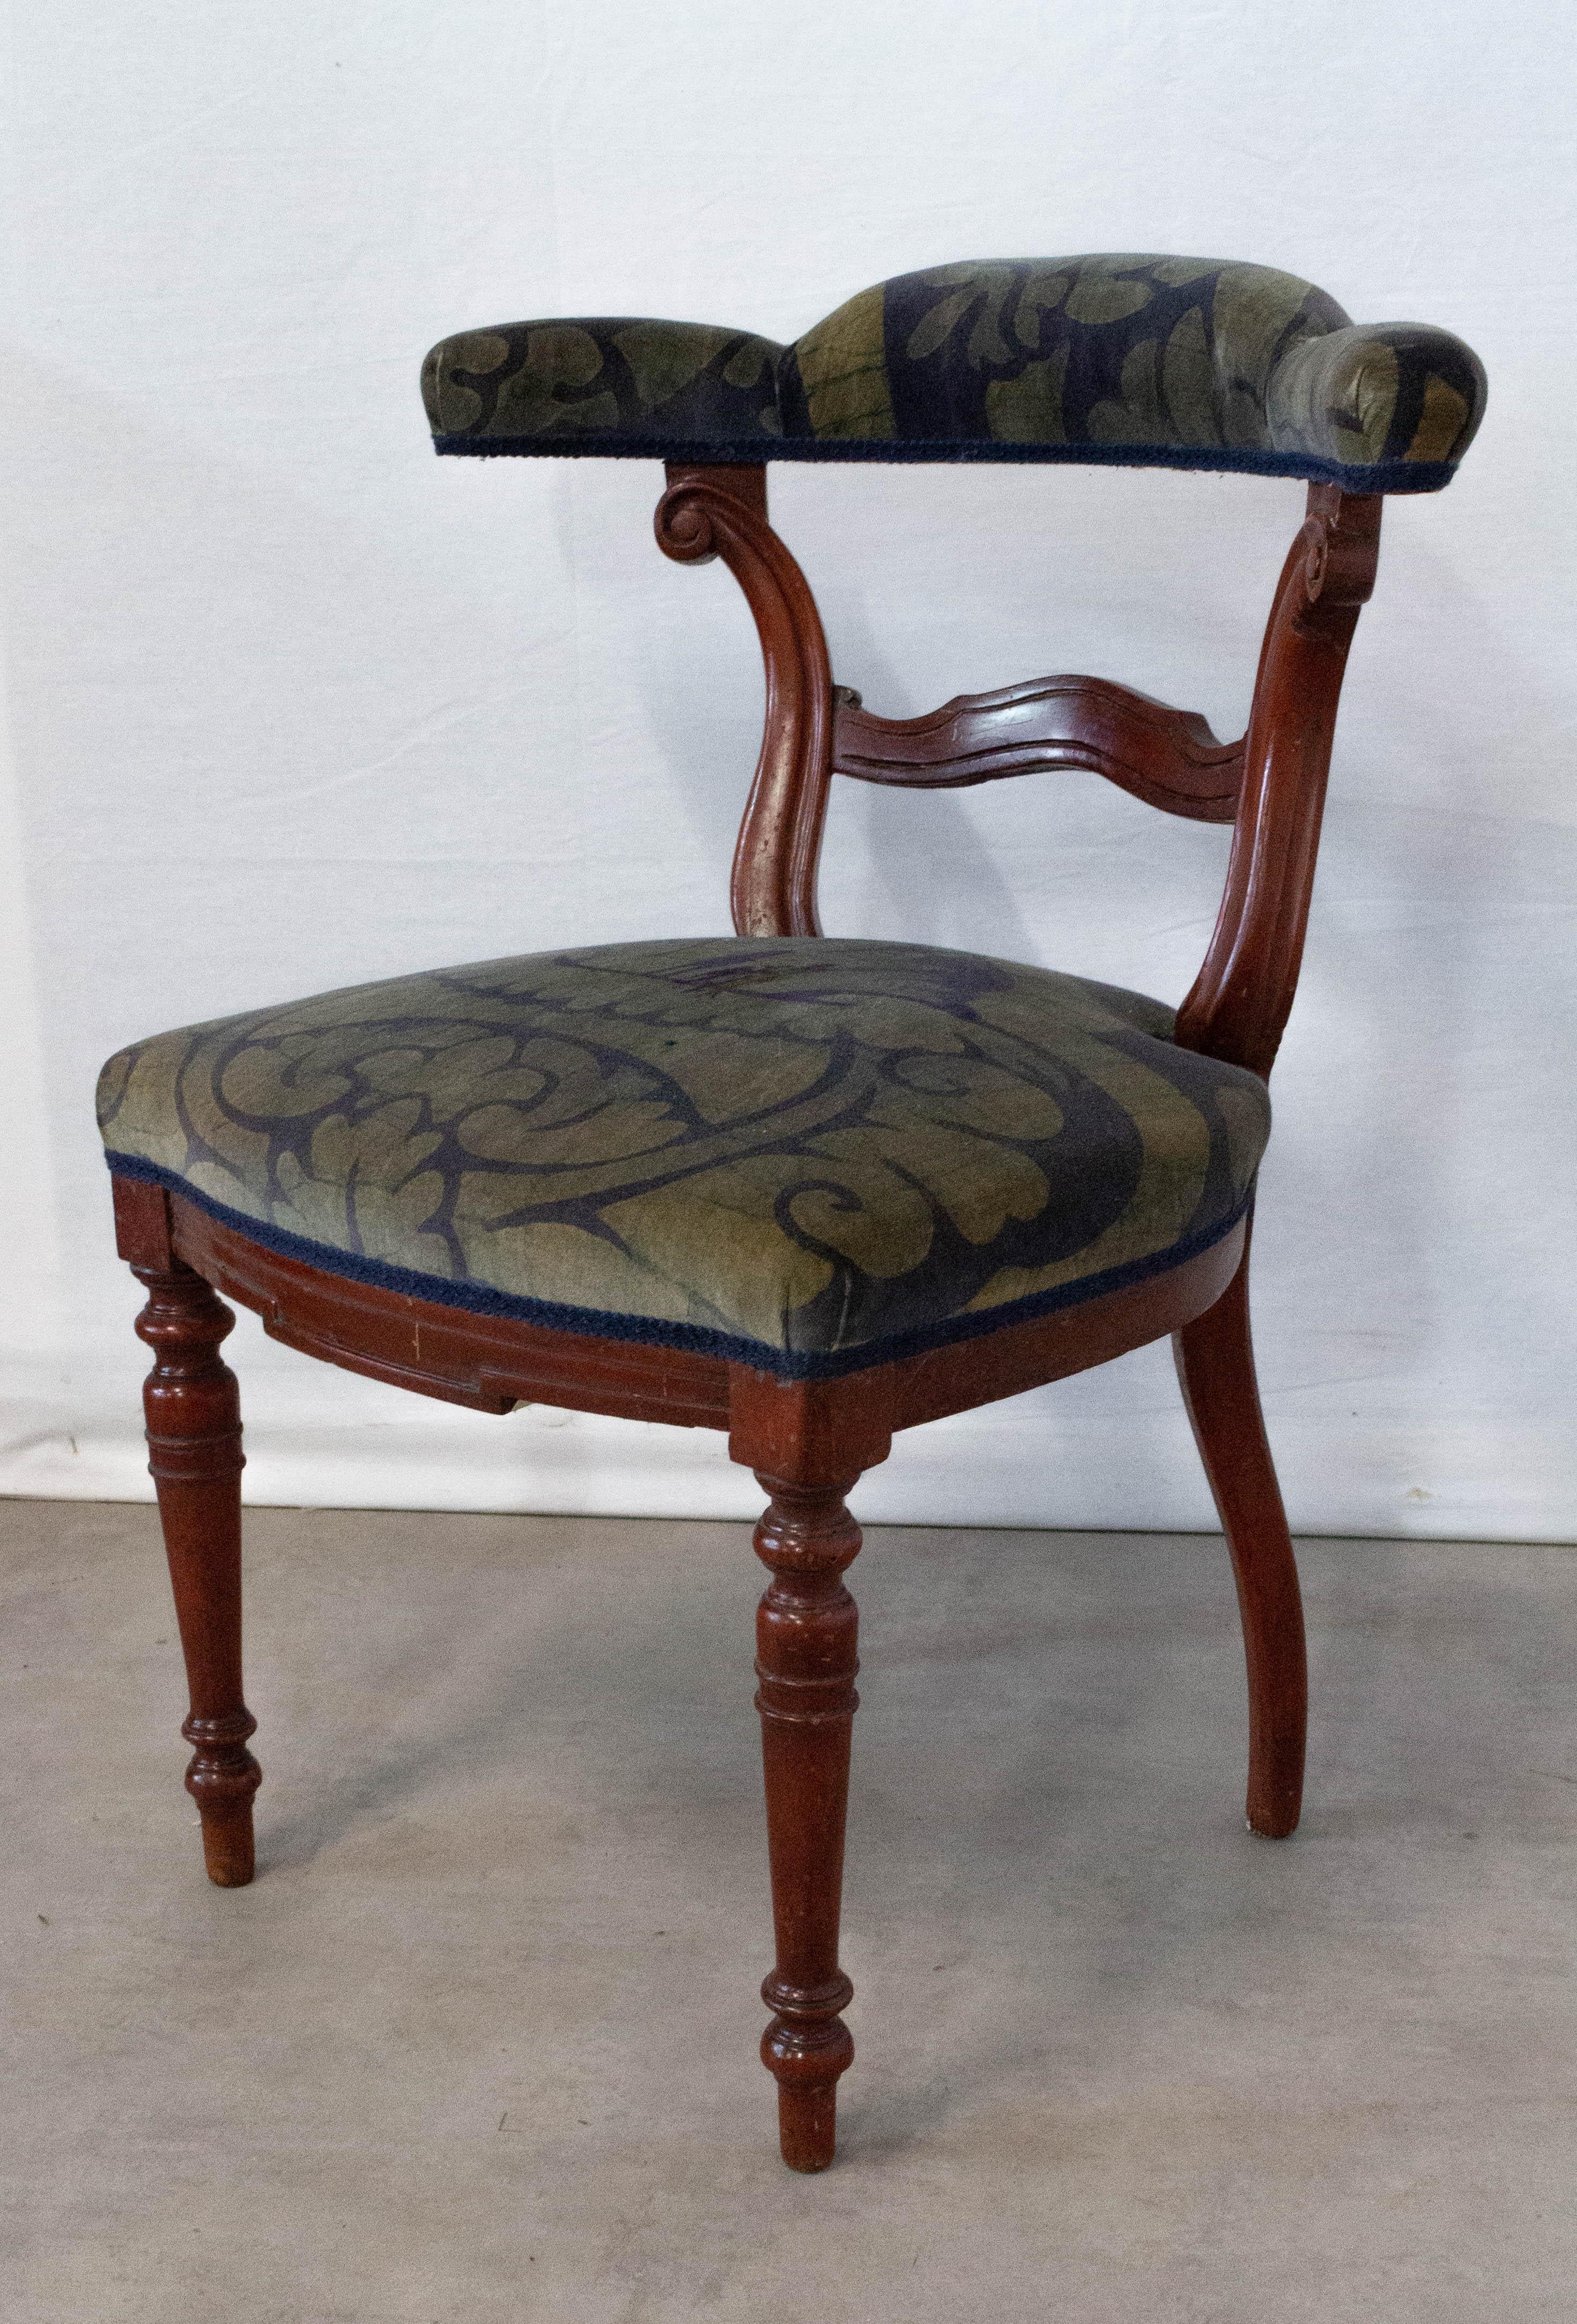 French Empire Revival side chair desk chair
Early 20th century
The fabric seat can easily be changed to suit your interior
Good vintage condition with beautiful patina
Frame is sound and solid.




  